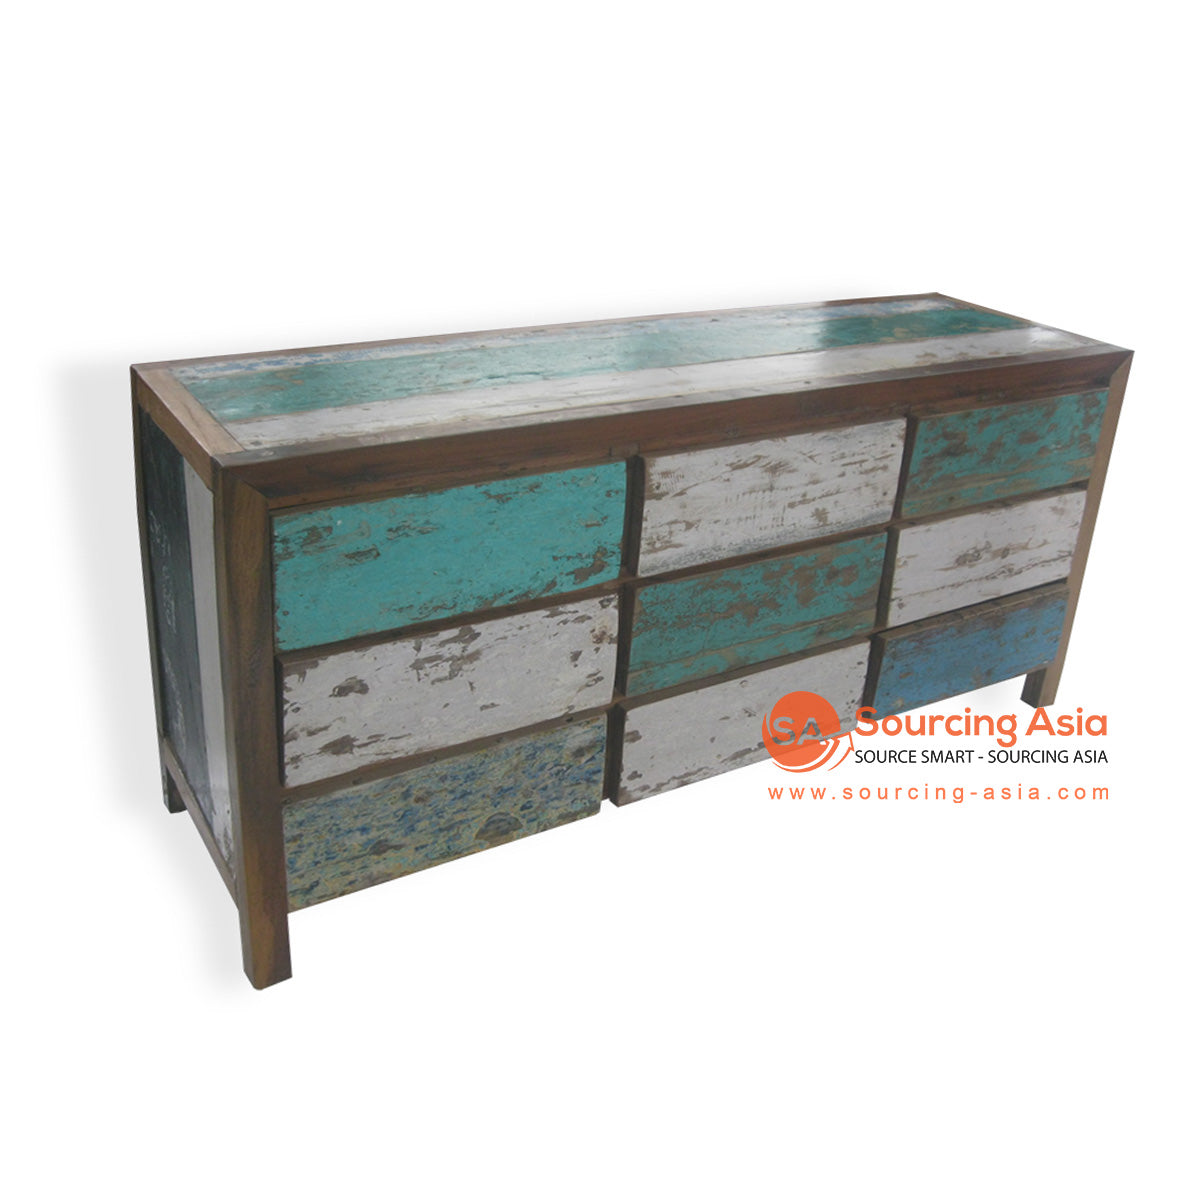 DVD066 NATURAL RECYCLED BOAT WOOD SIX DRAWERS BUFFET